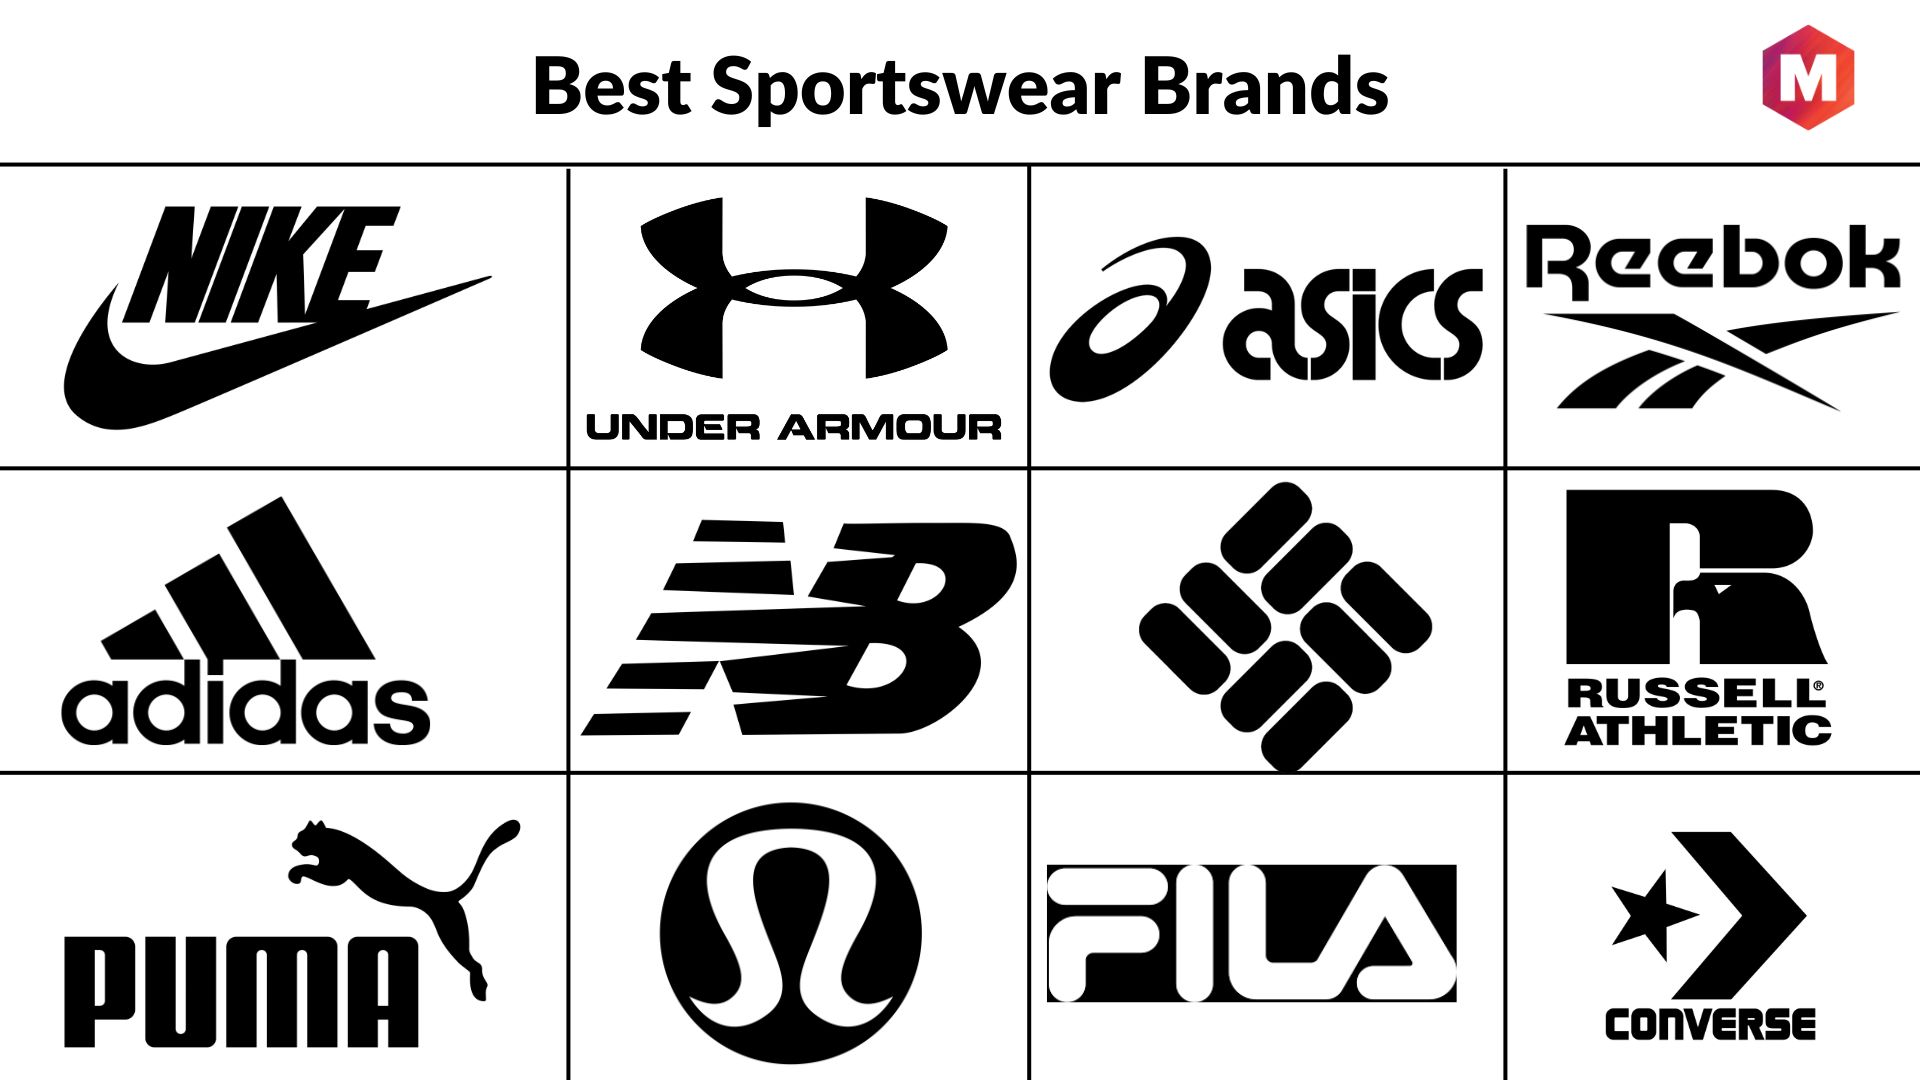 Sports Brand Logos And Names